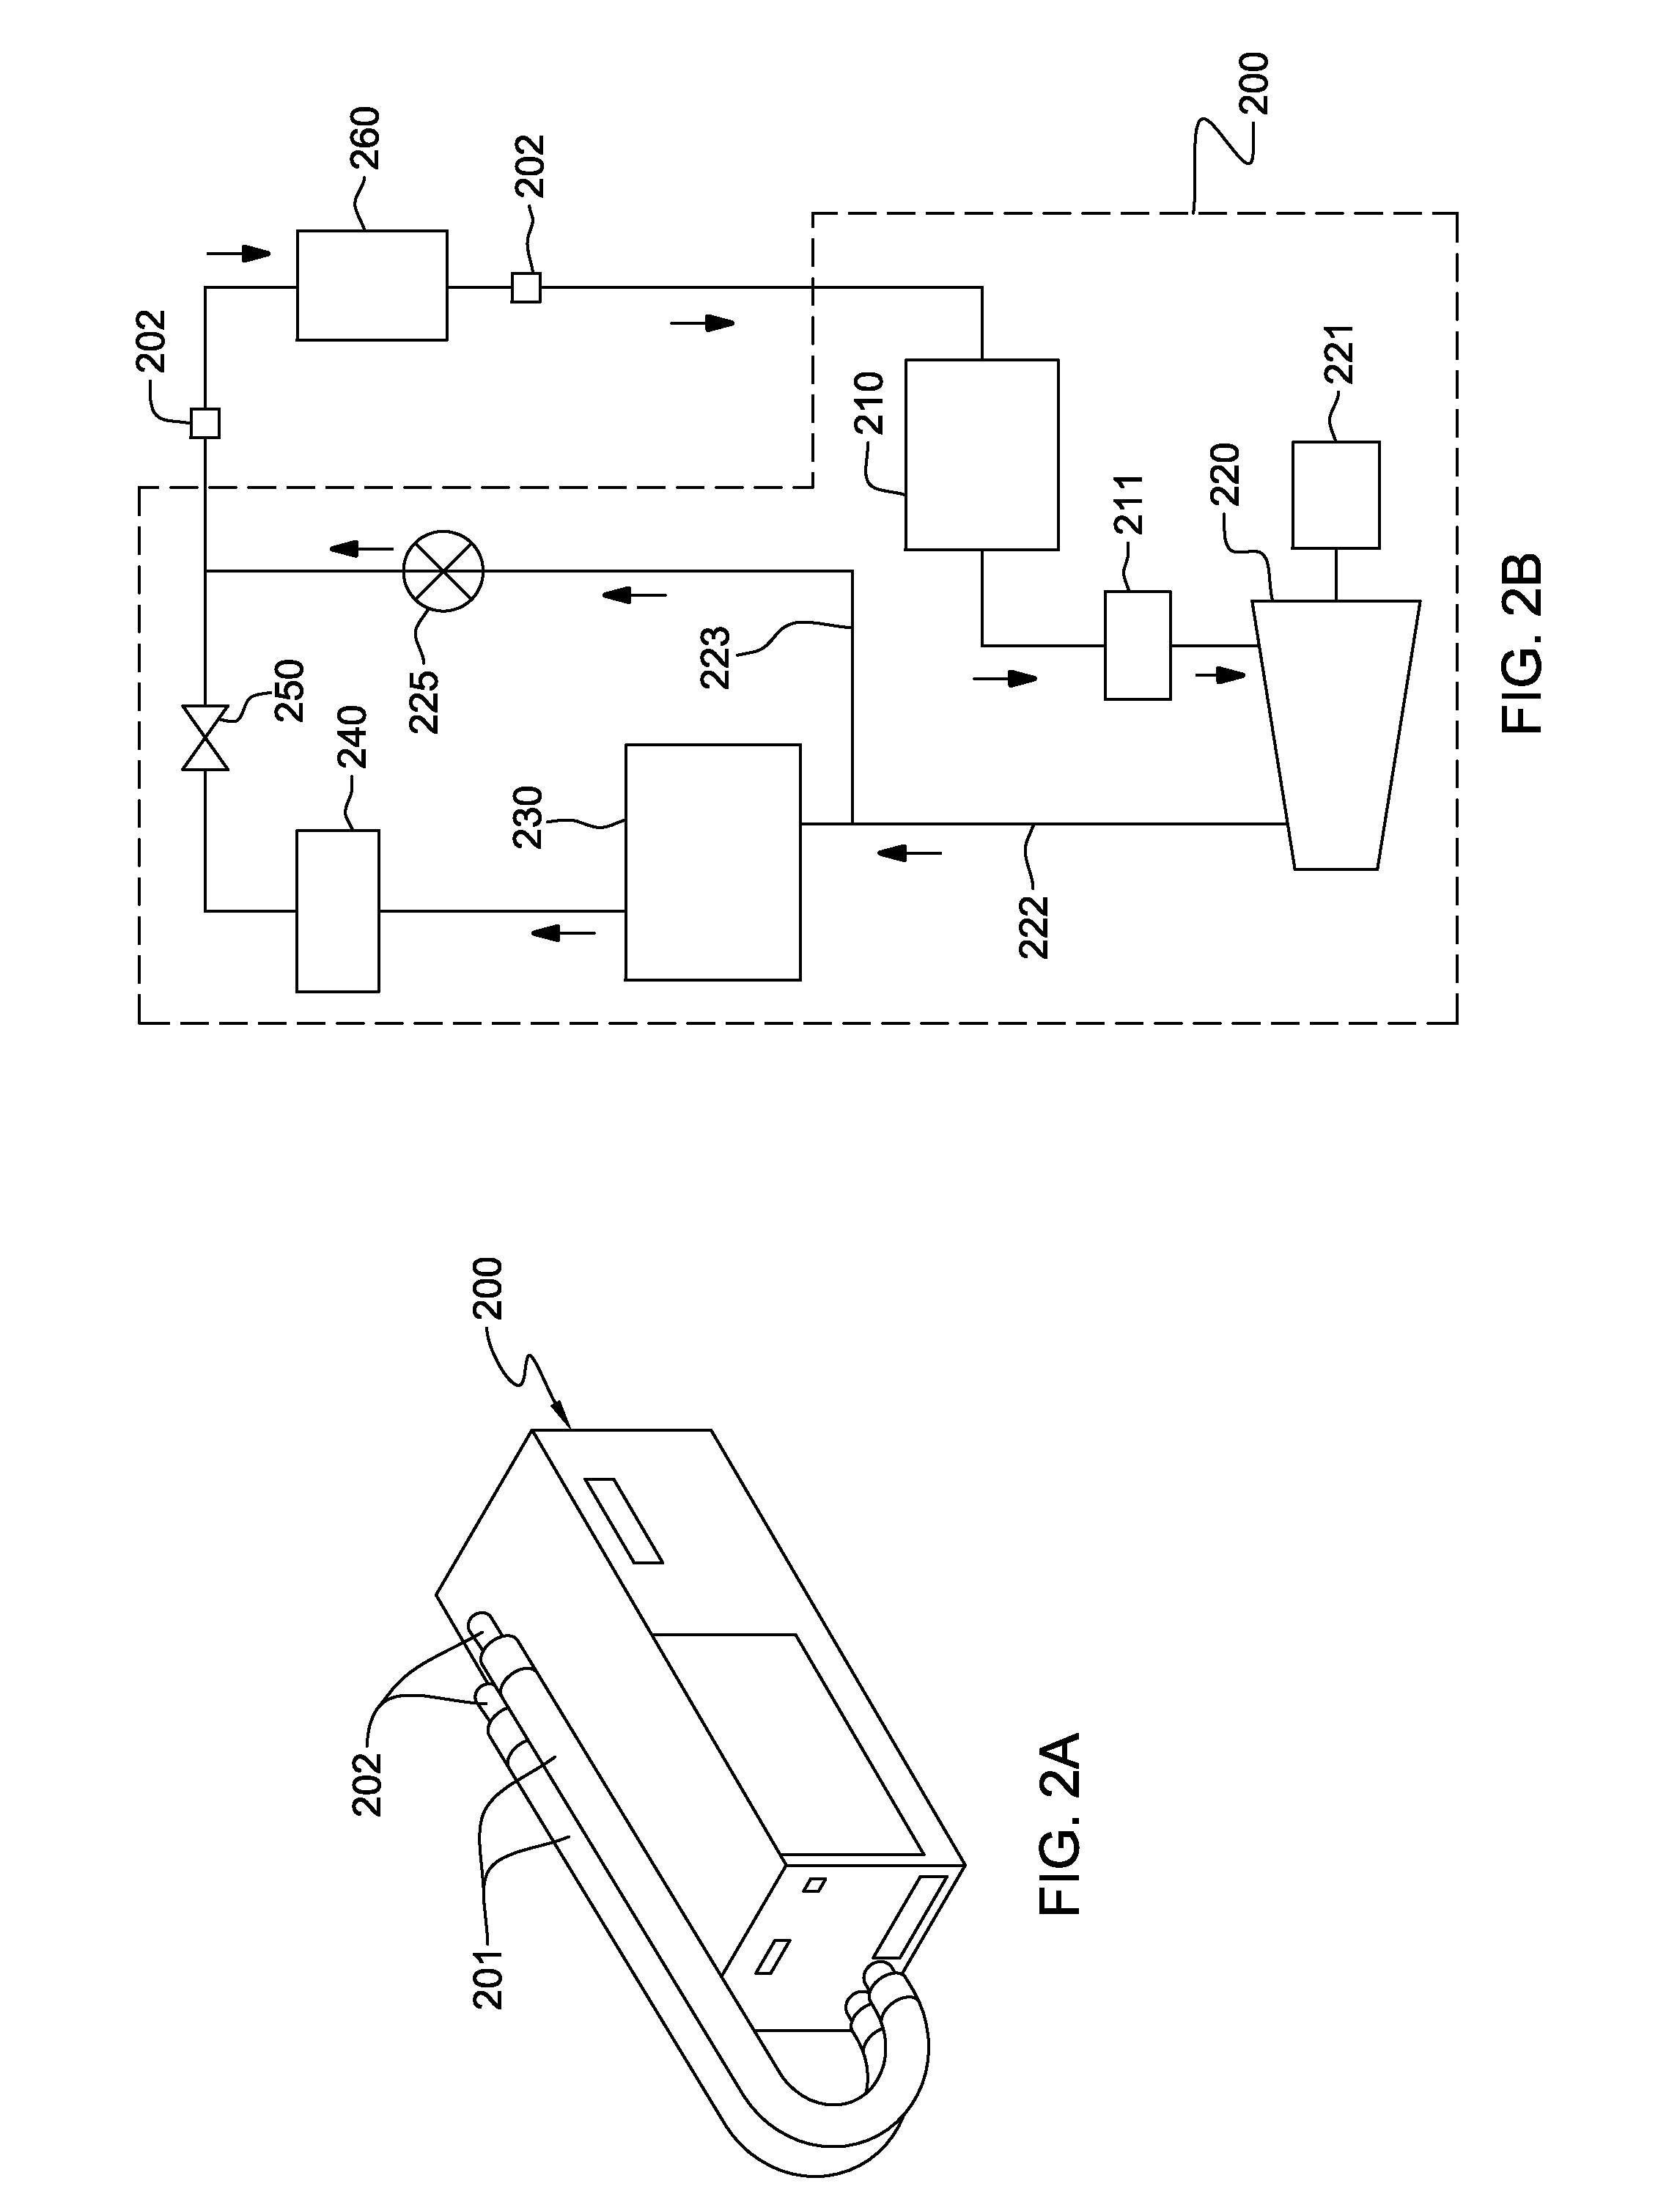 Thermoelectric-enhanced, vapor-compression refrigeration method facilitating cooling of an electronic component